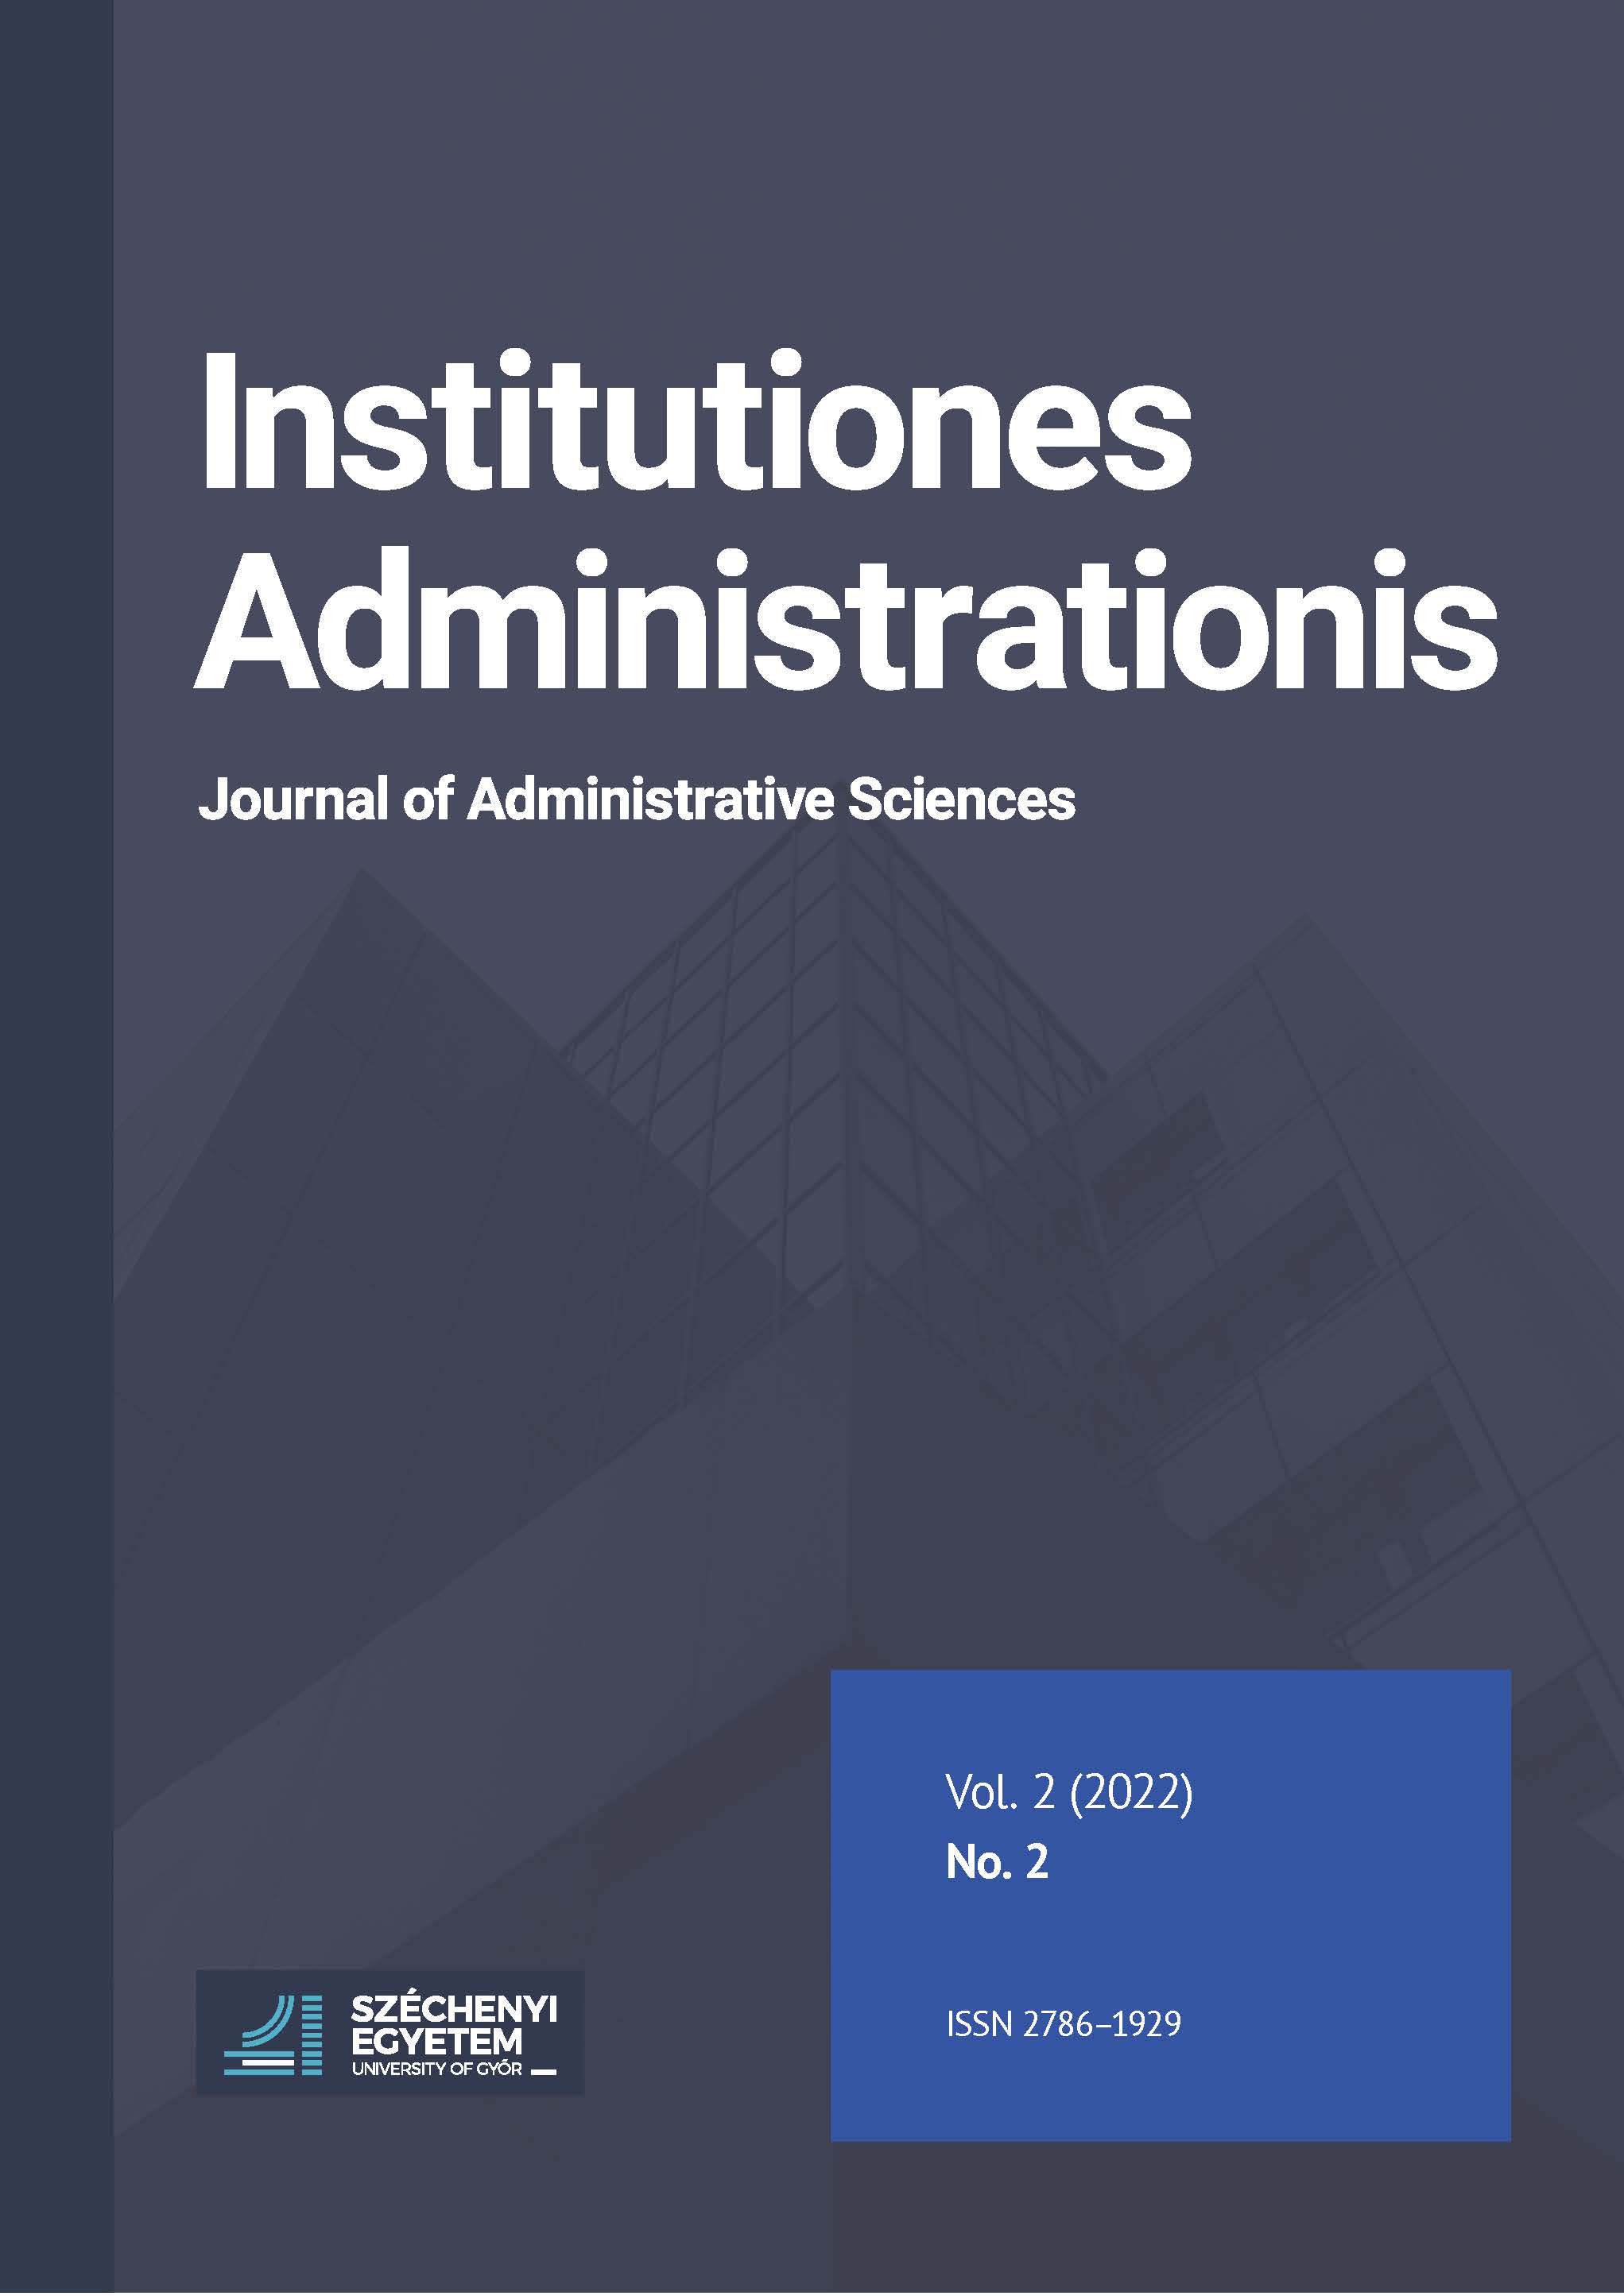 					View Vol. 2 No. 2 (2022): Institutiones Administrationis - Journal of Administrative Sciences
				